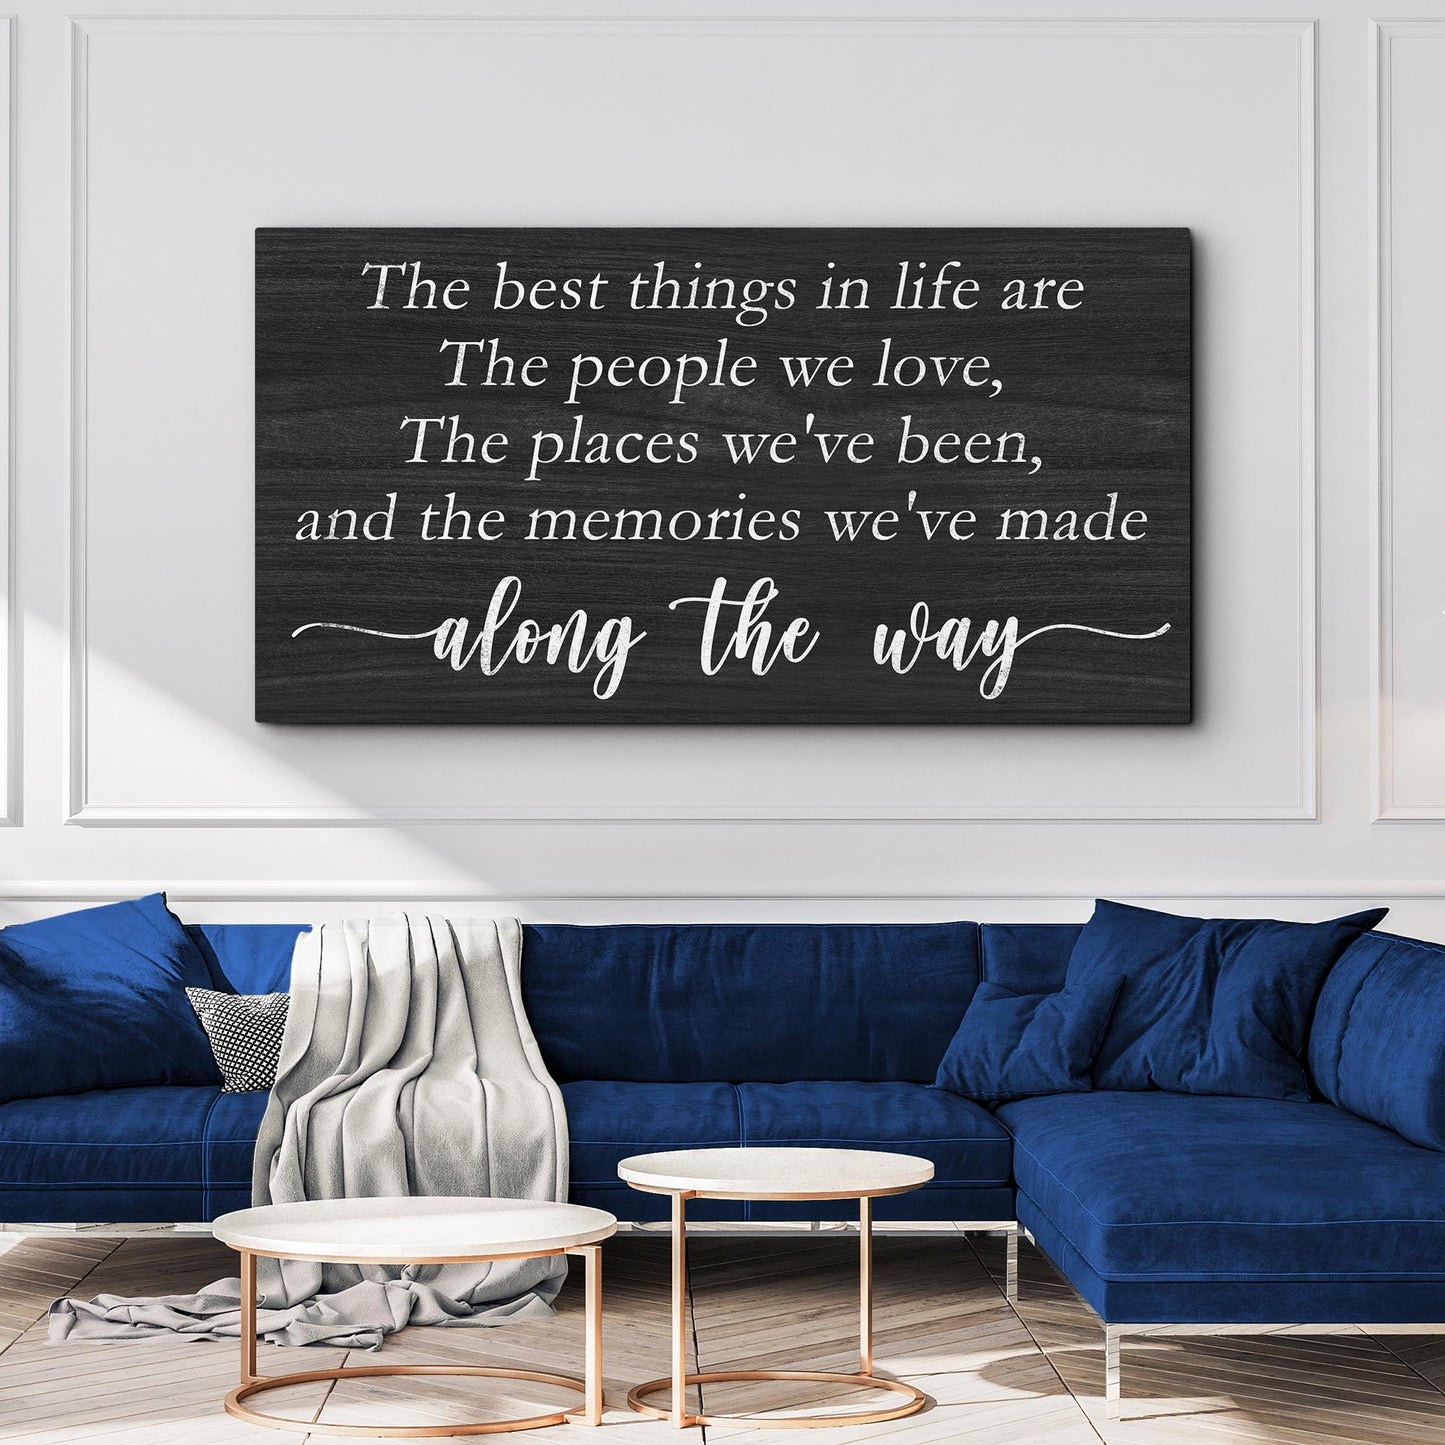 The Best Things In Life Sign III - Image by Tailored Canvases